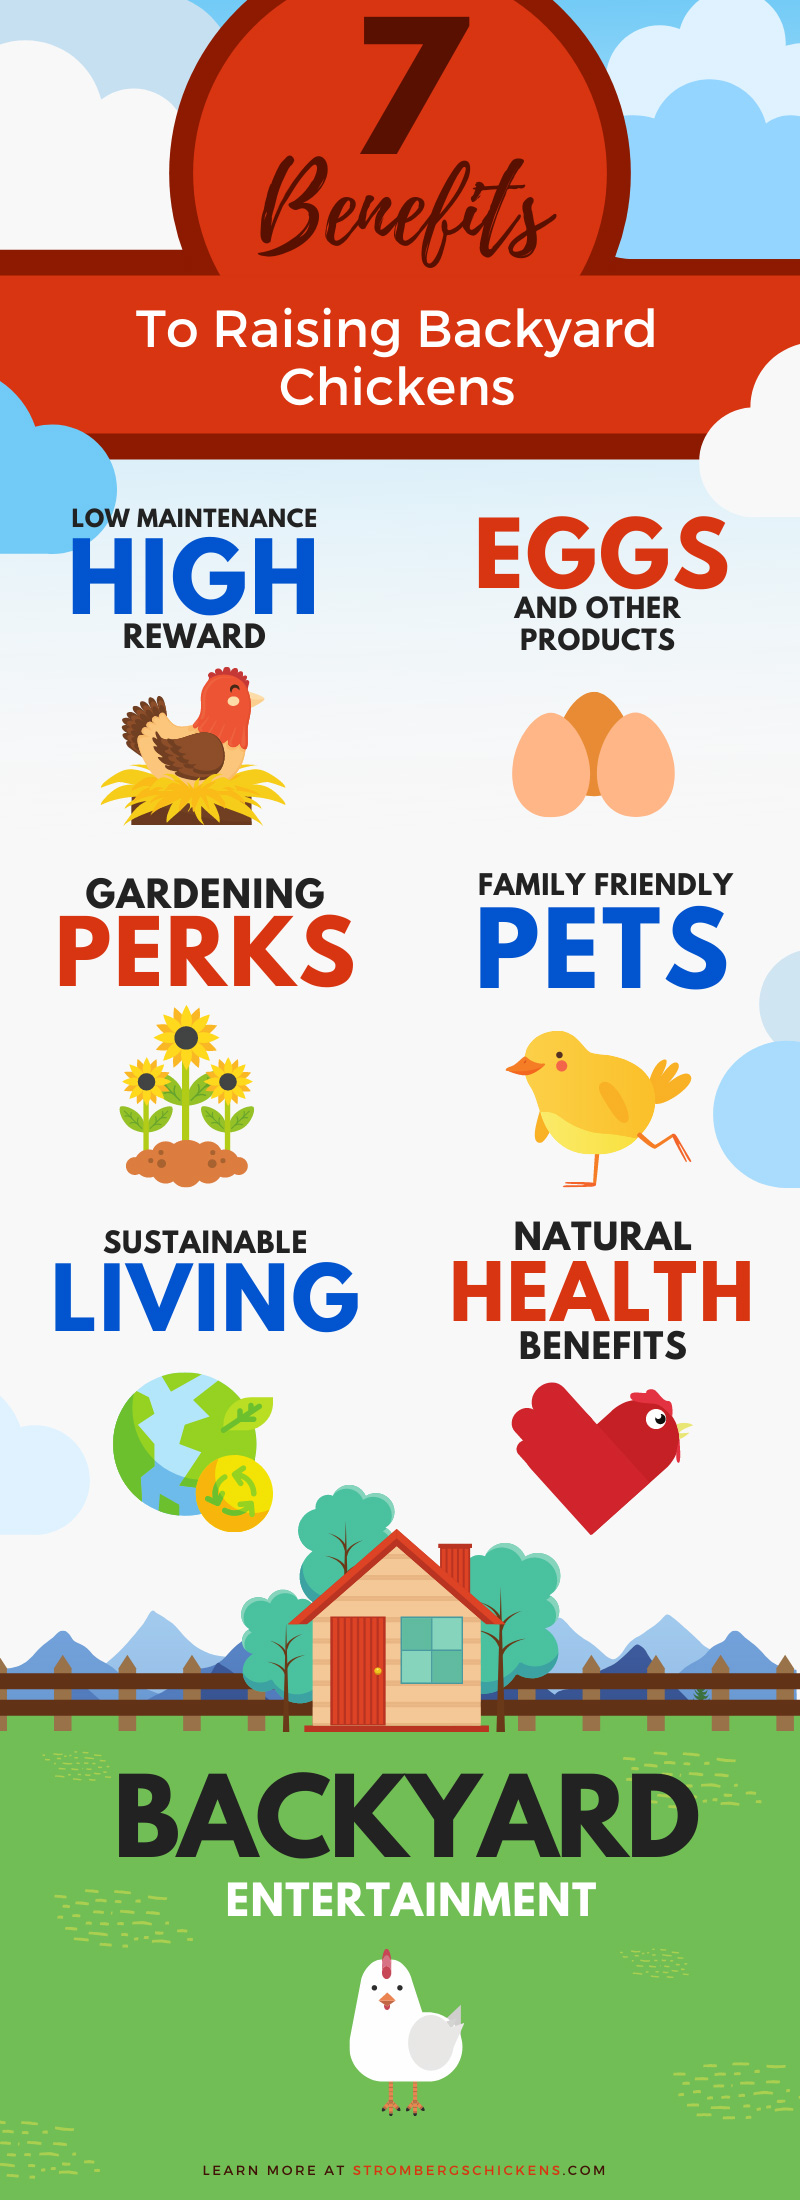 Infographic about 7 Benefits to Raising Backyard Chickens